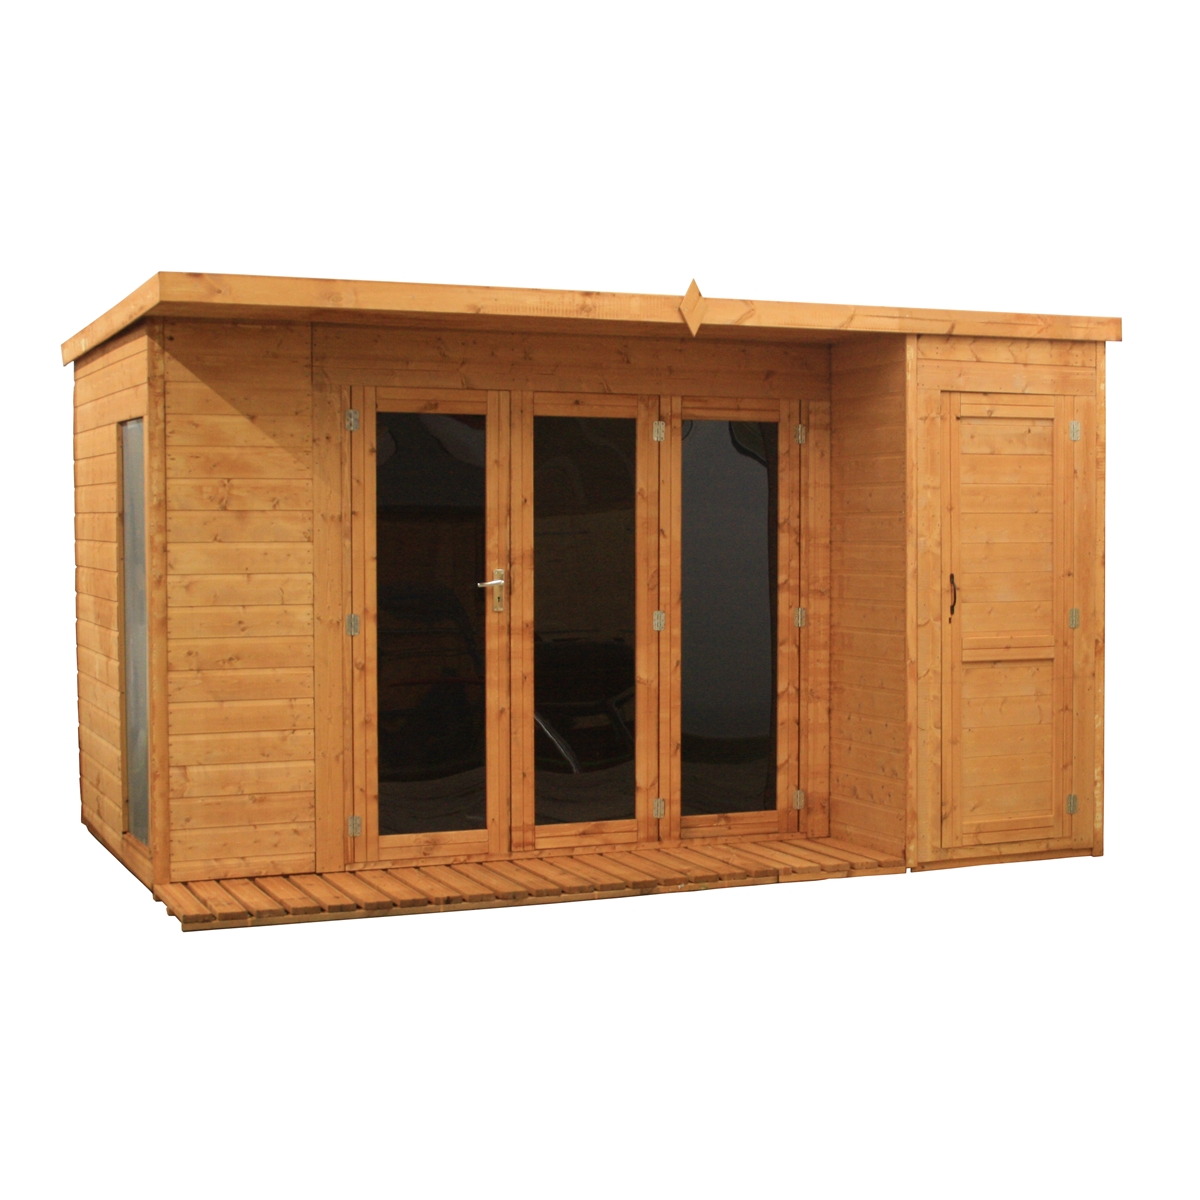 12 x 8 Contempory Gardenroom Large Combi (12mm Tongue and 